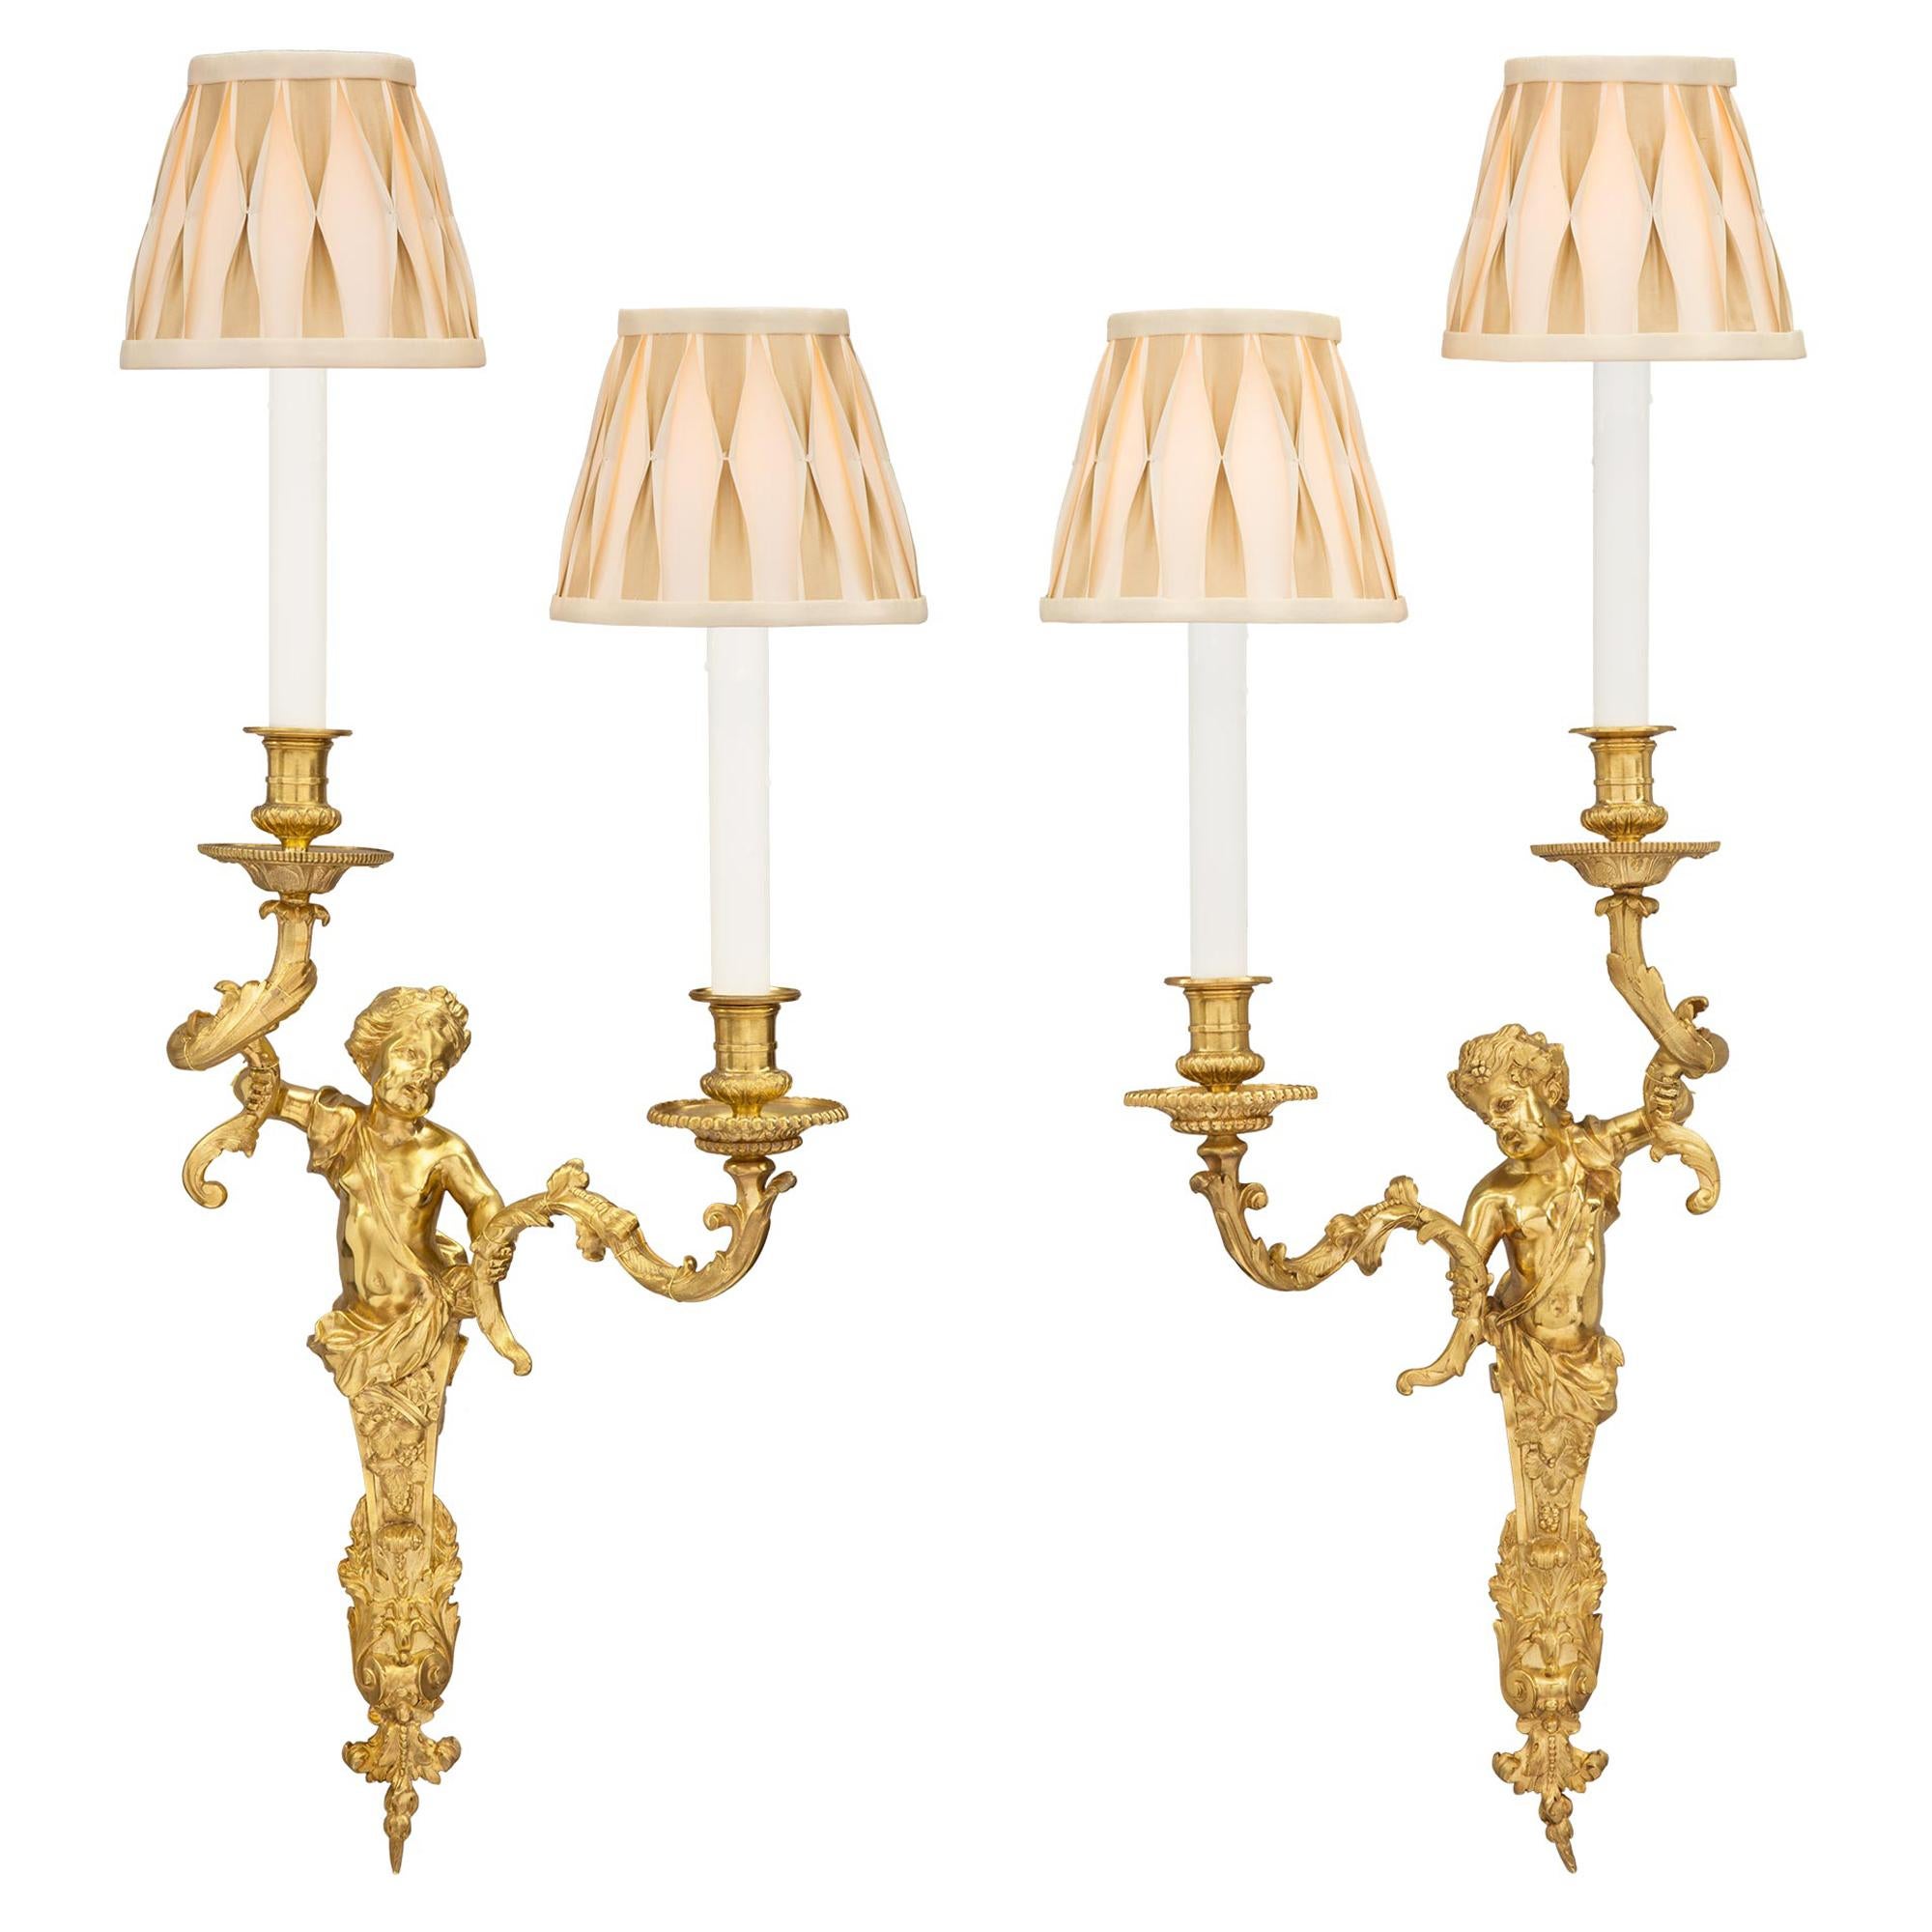 Pair of French 19th Century Louis XVI Style Ormolu Sconces, Attributed to Dasson